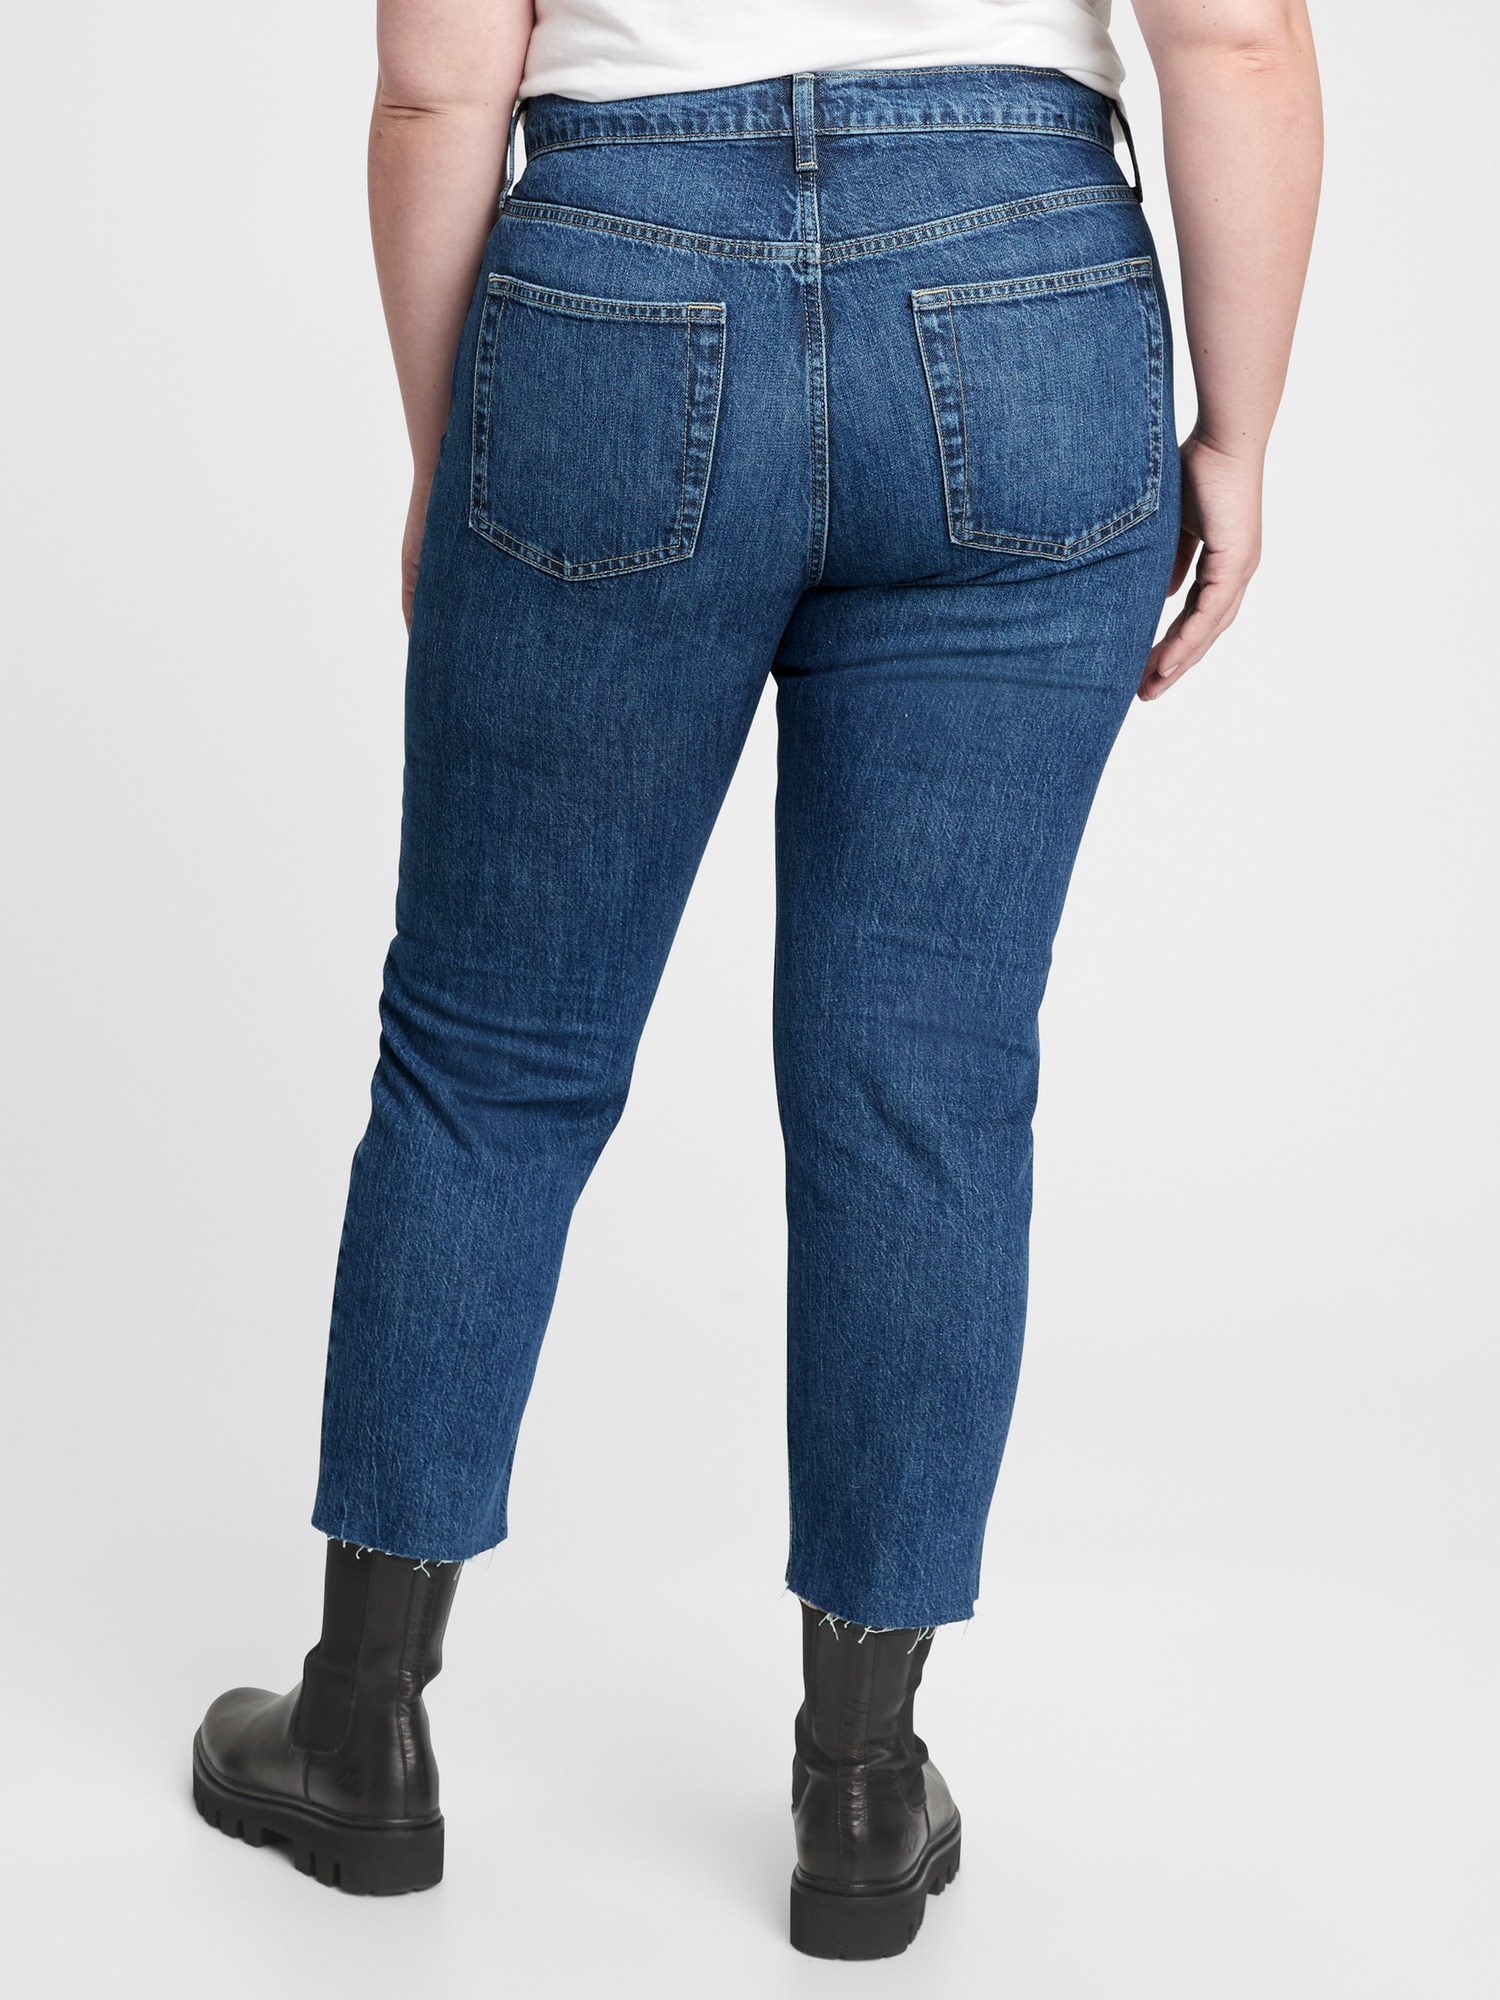 High Rise Cheeky Straight Jeans with Washwell | Gap Factory